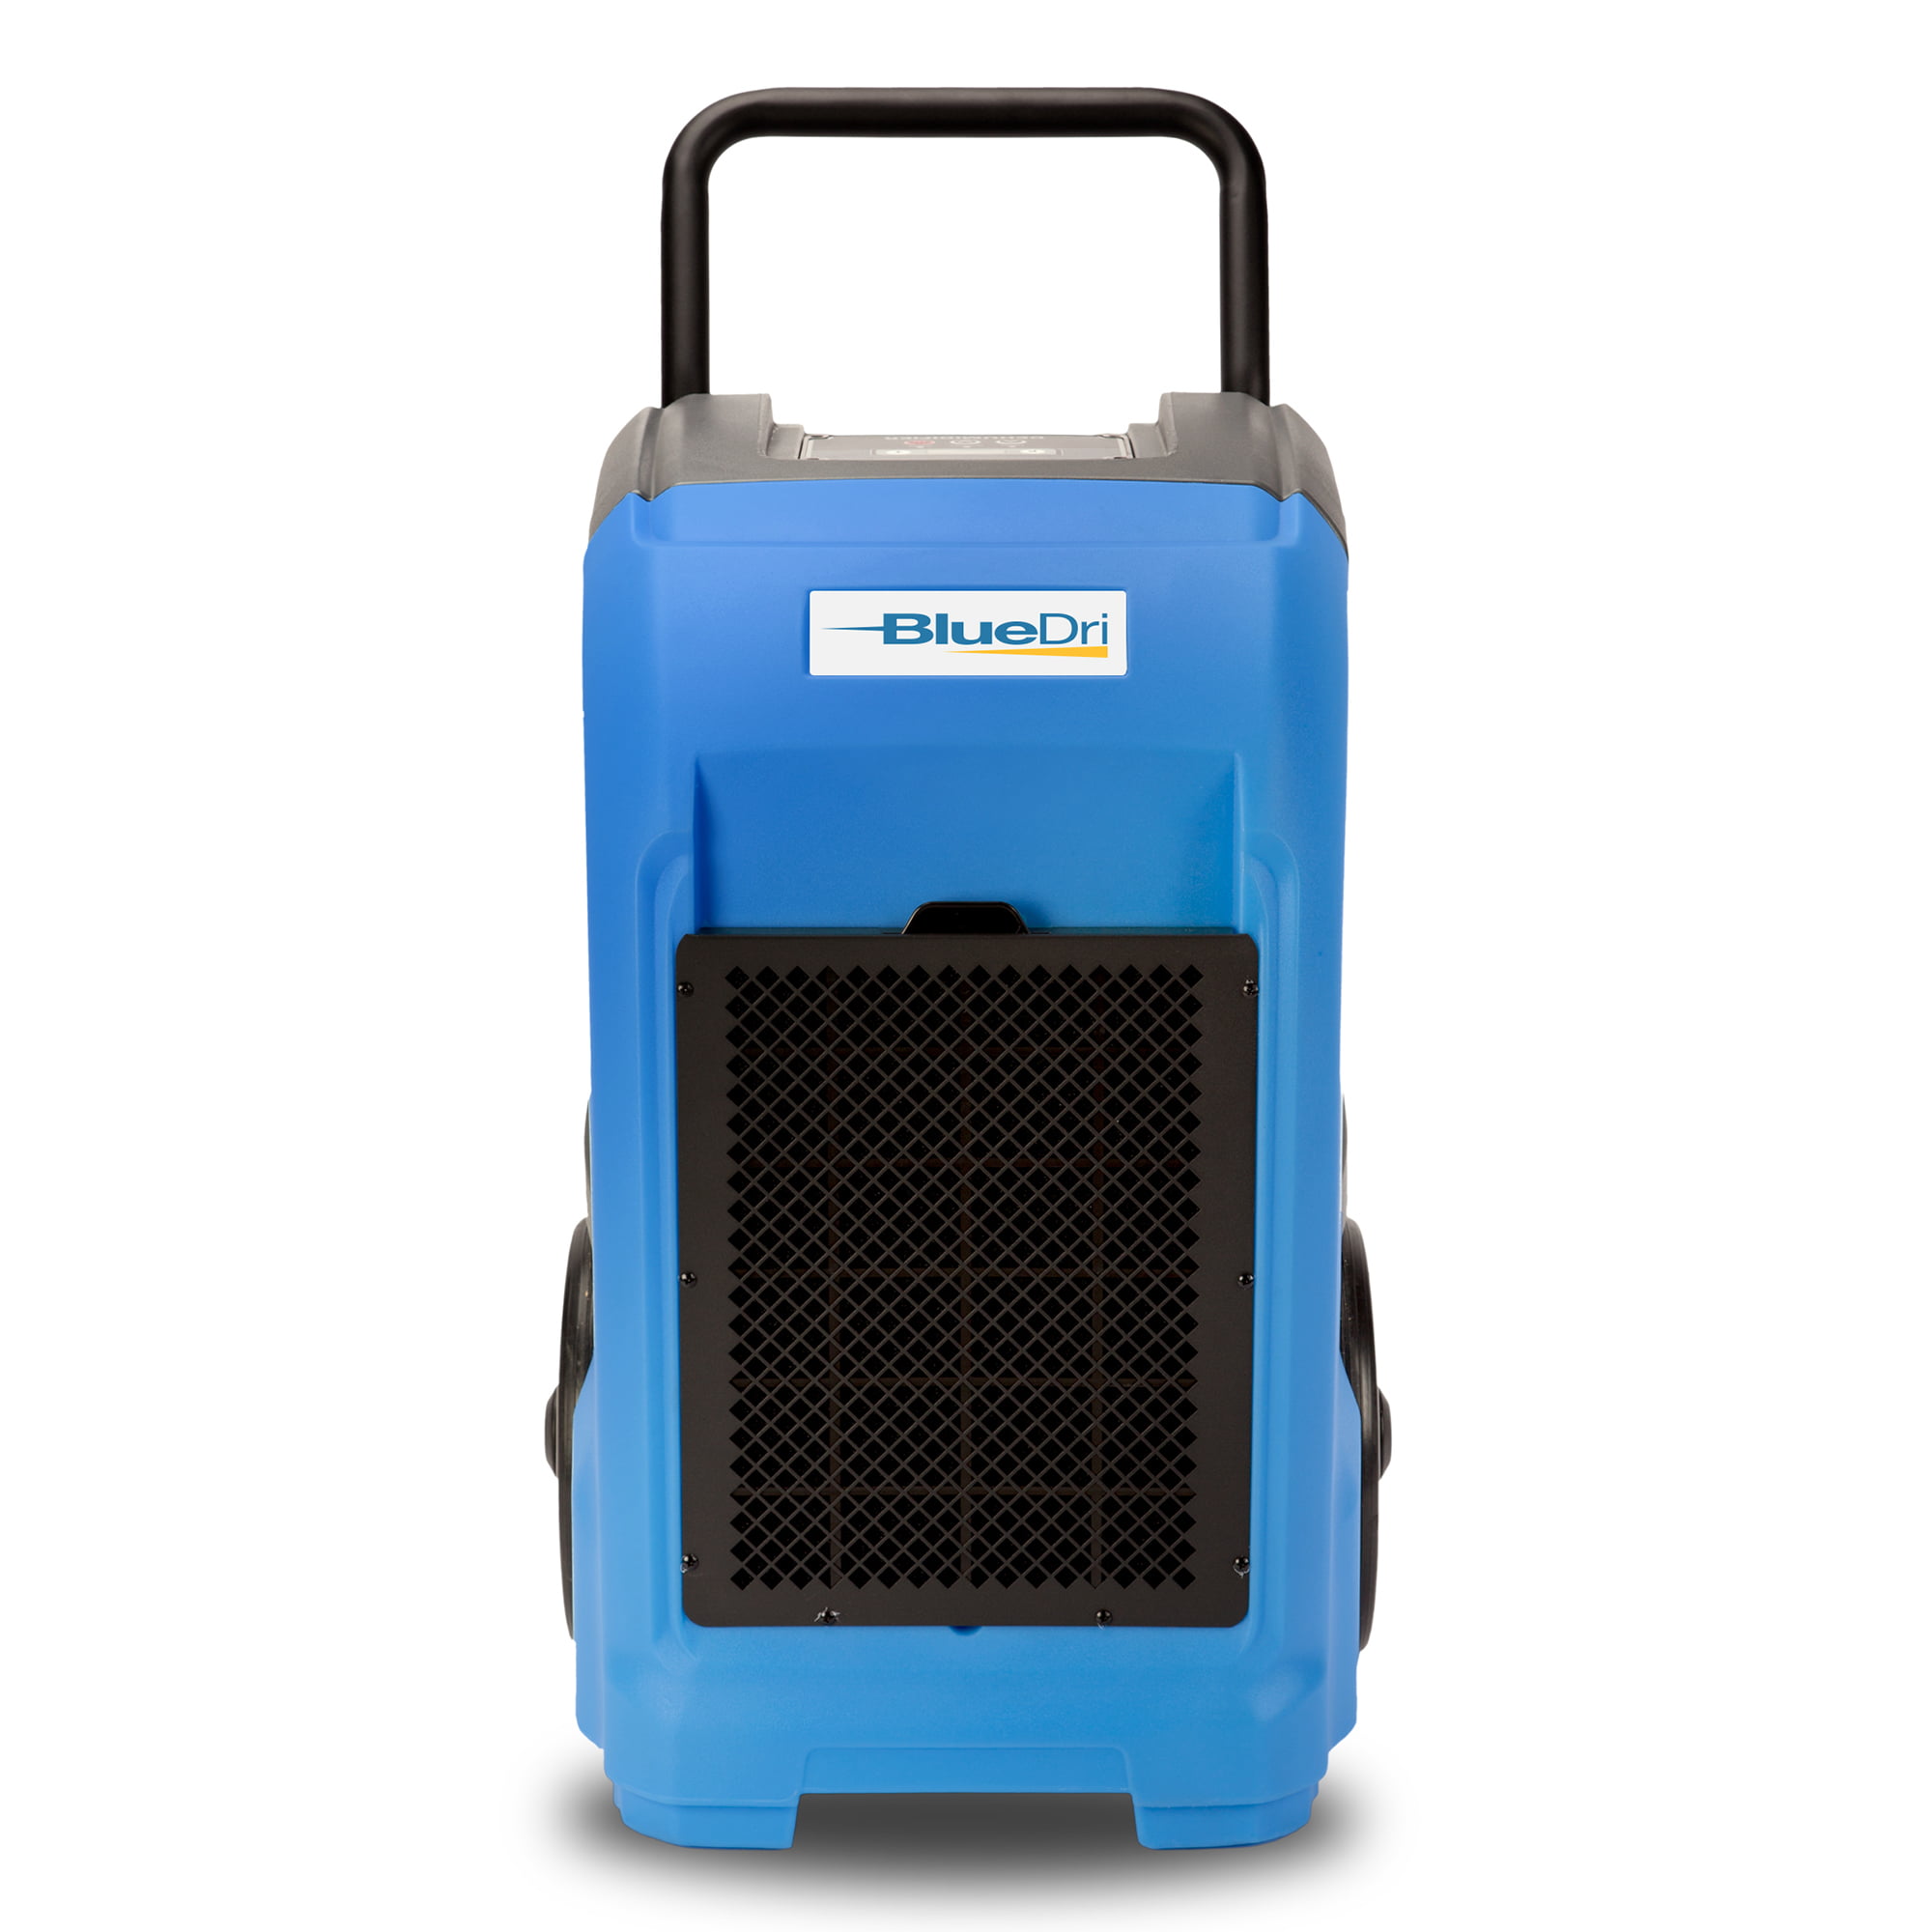 Blue BlueDri BD-130P 225PPD Industrial Commercial Dehumidifier with Hose for Basements in Homes and Job Sites 